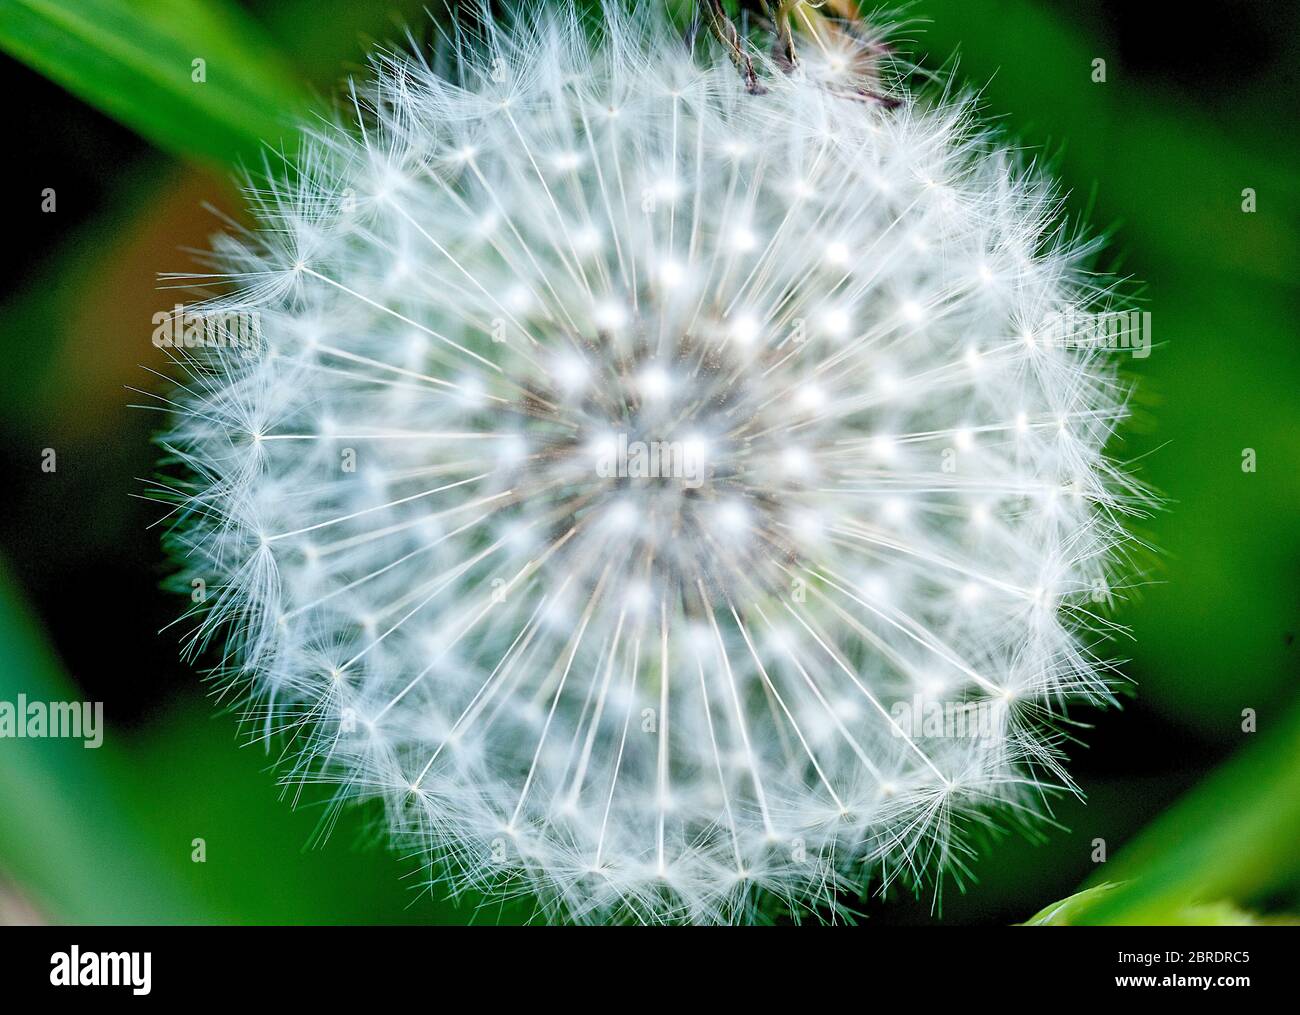 Close up macro image of dandelion seed head with incredible natural pattern. Stock Photo